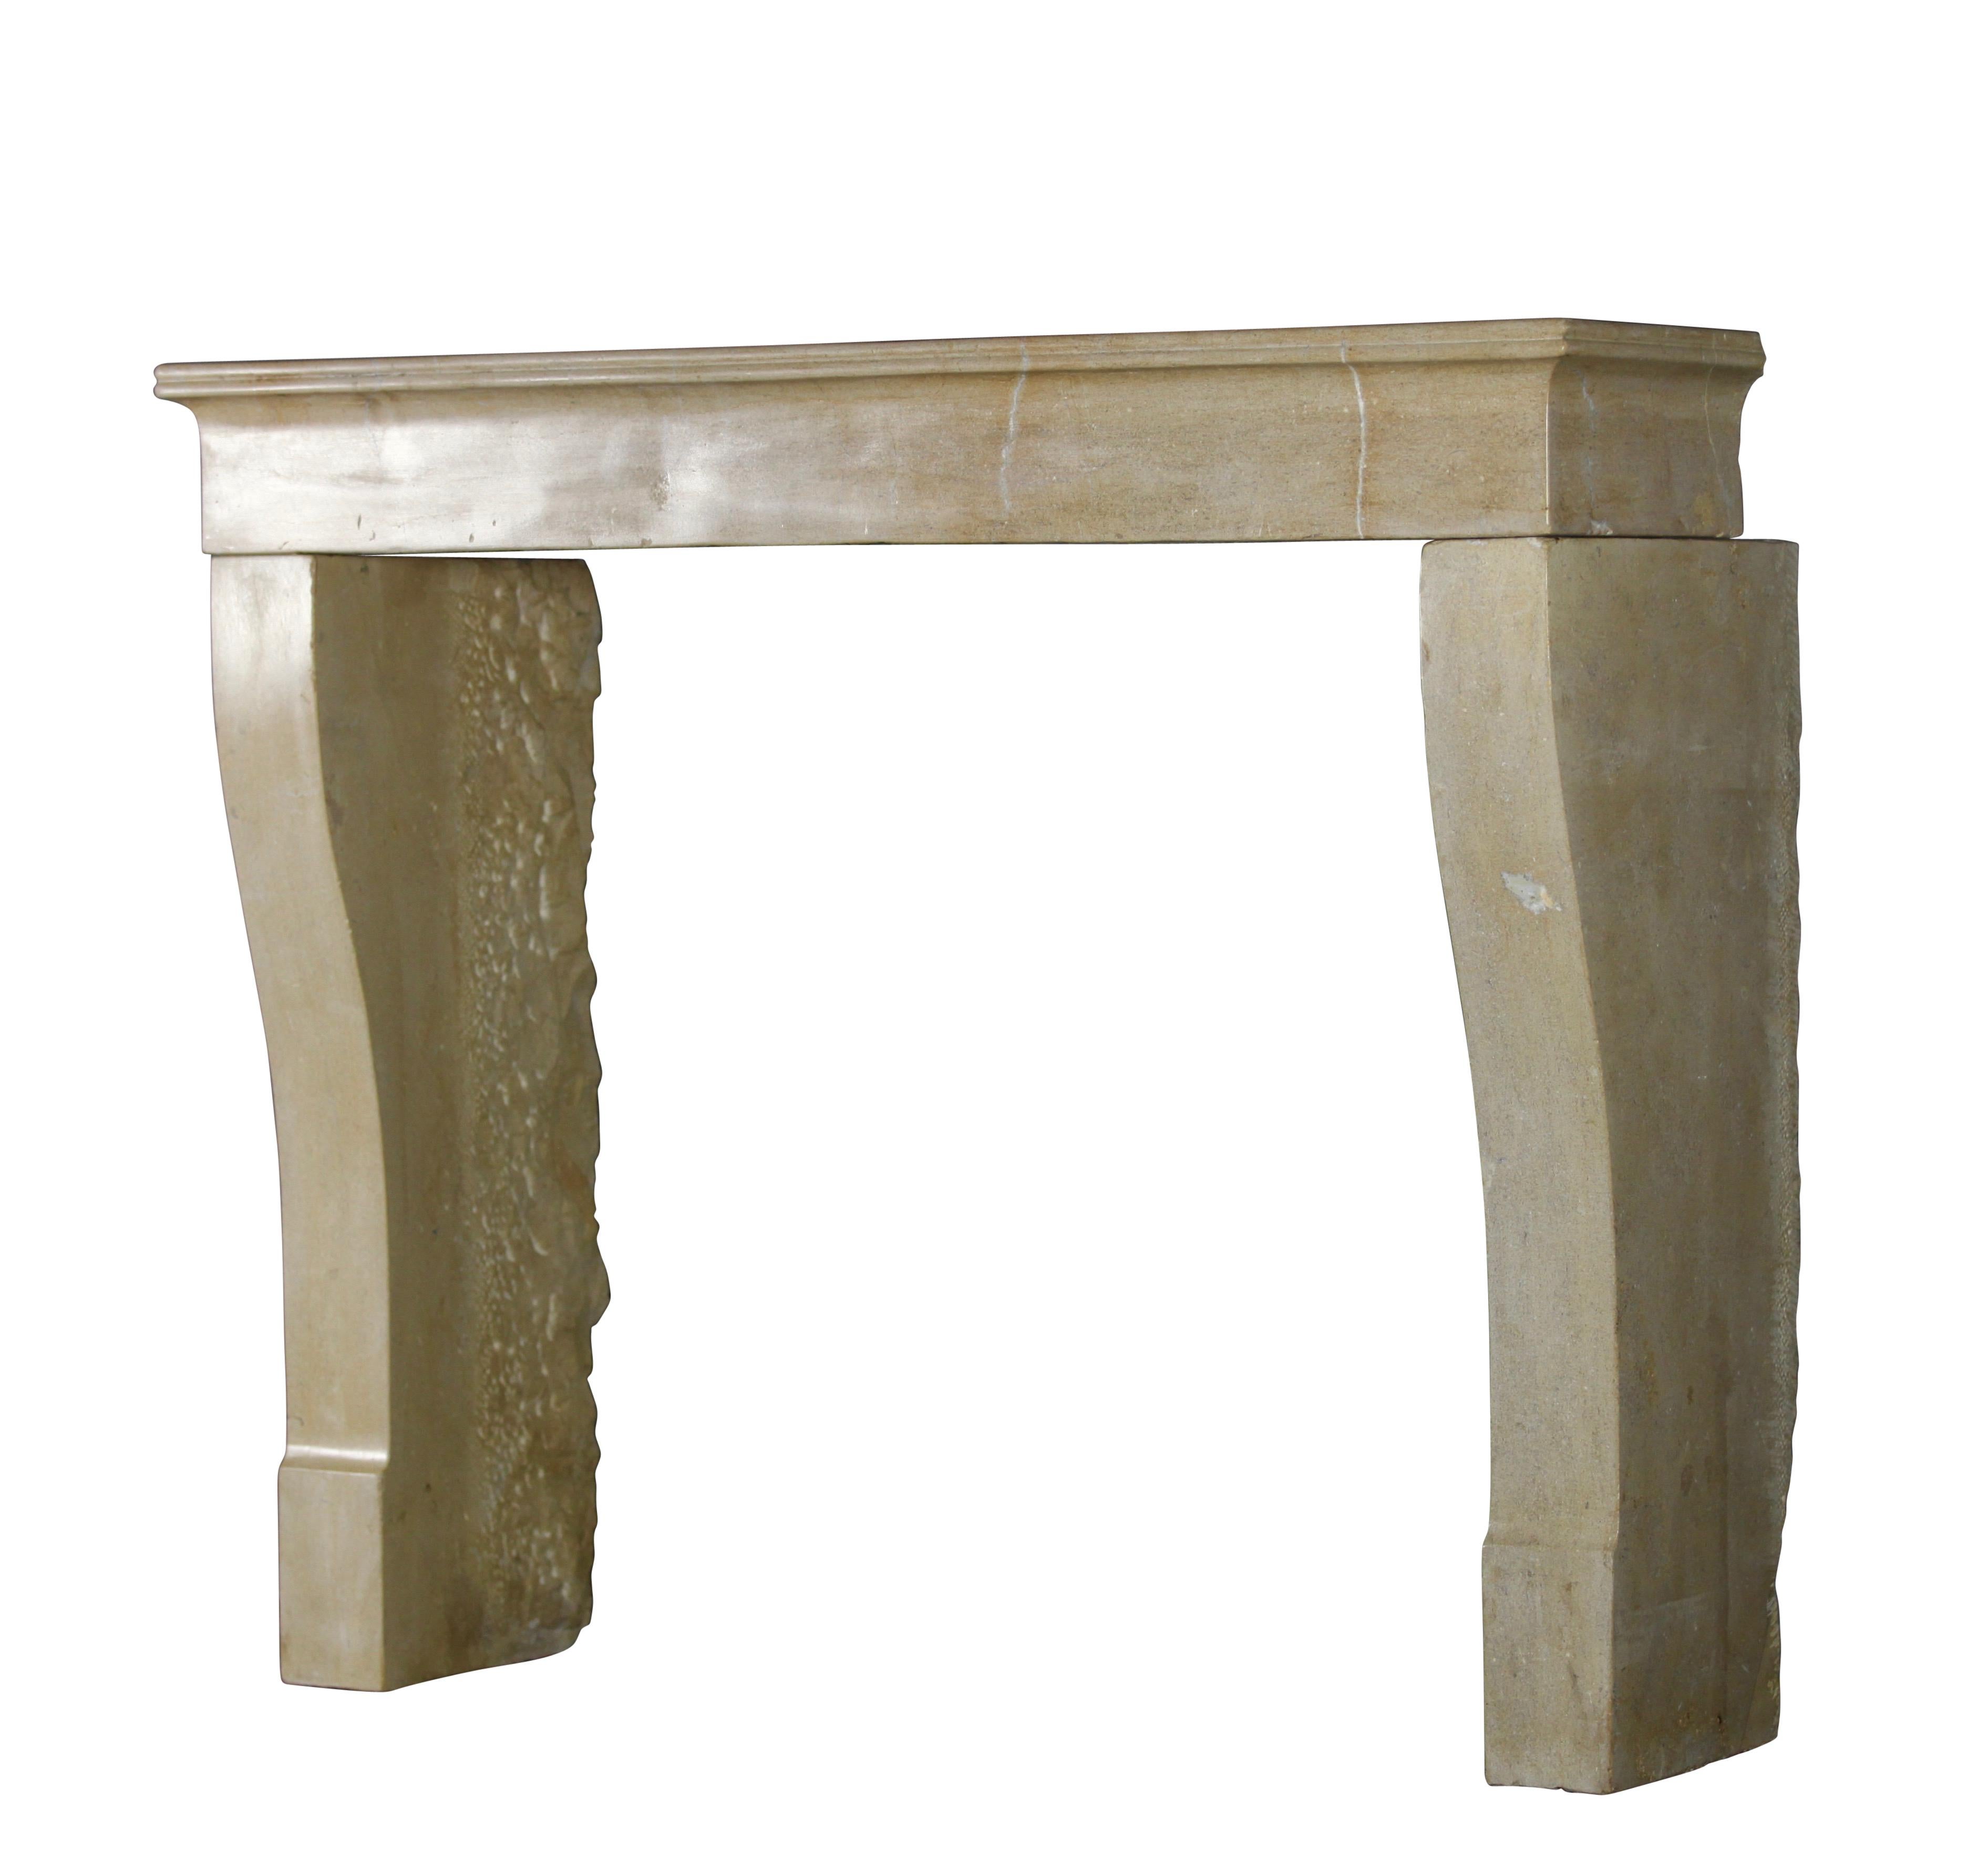 A fine 19th century French petite Bourguignon original hard stone/limestone fireplace surround. Elegant and small for a timeless minimalistic interior with a smooth surface. 
Measures:
120 cm exterior width 47.24 inch
102 cm exterior height 40.15